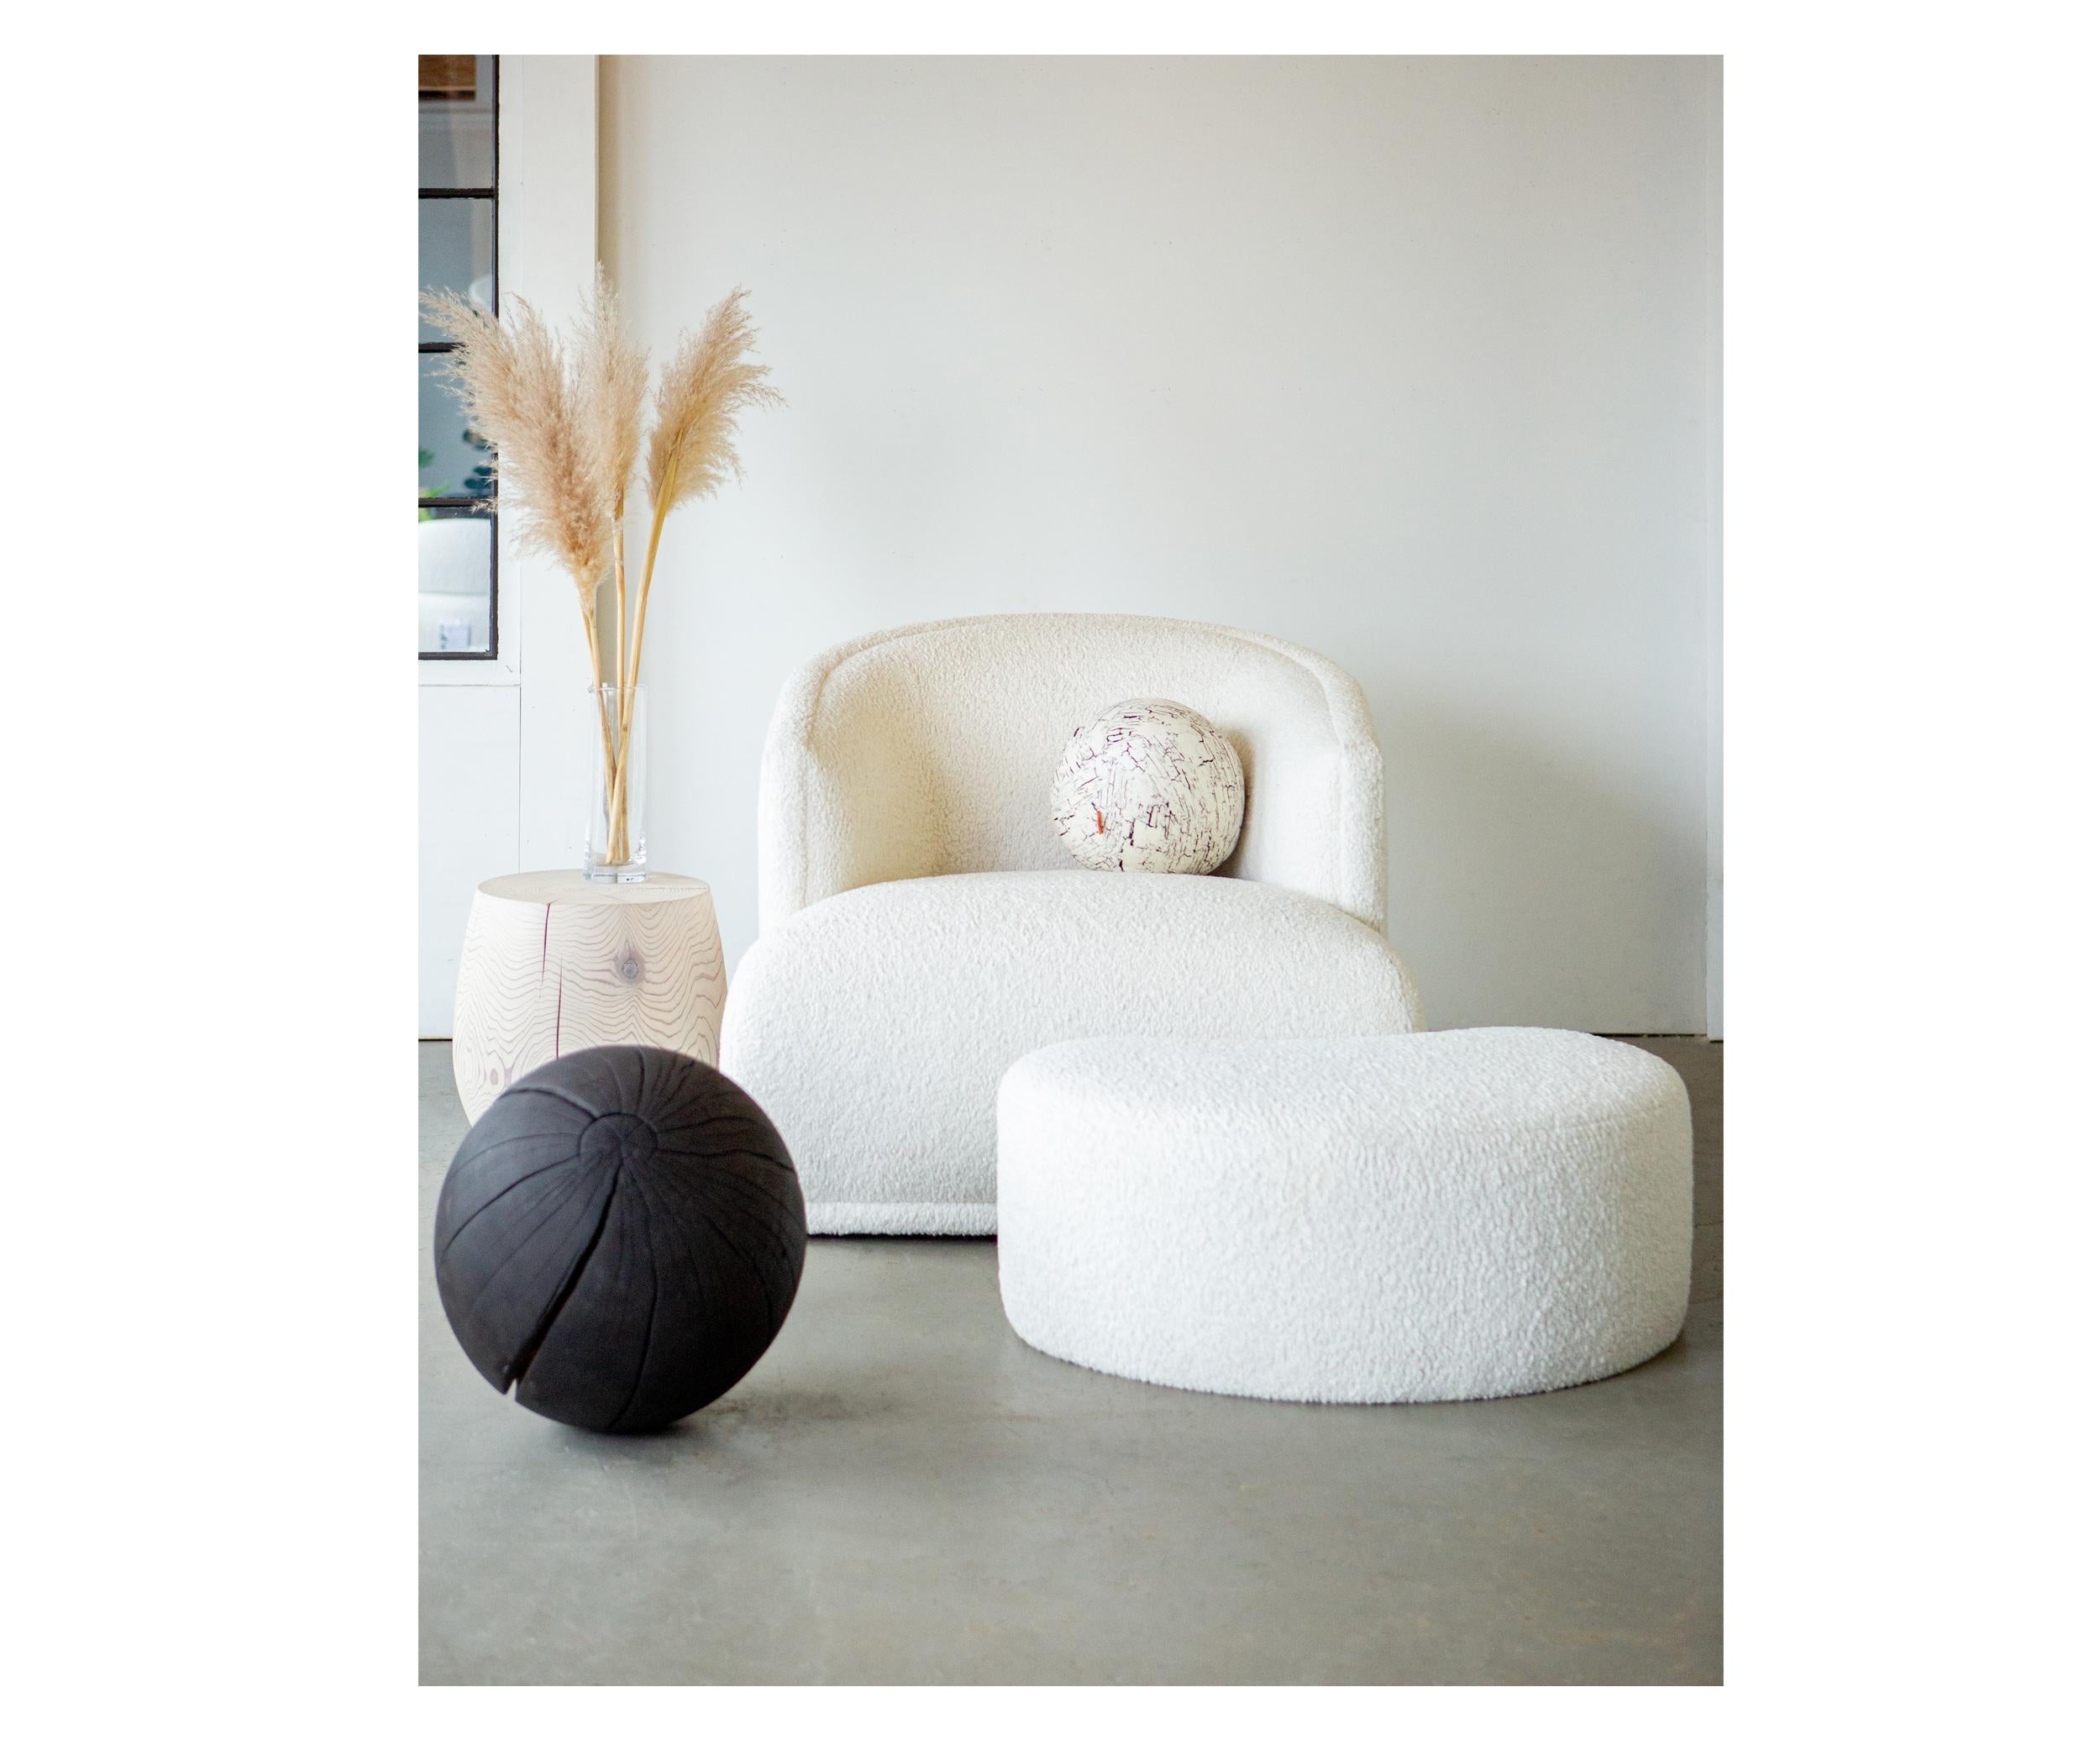 The Mallo Swivel Chair isn't just a chair, it's a declaration of style and comfort. With a design that is both sophisticated and approachable, it invites you to make yourself at home. The soft curves cradle your body, providing a cocoon of comfort,